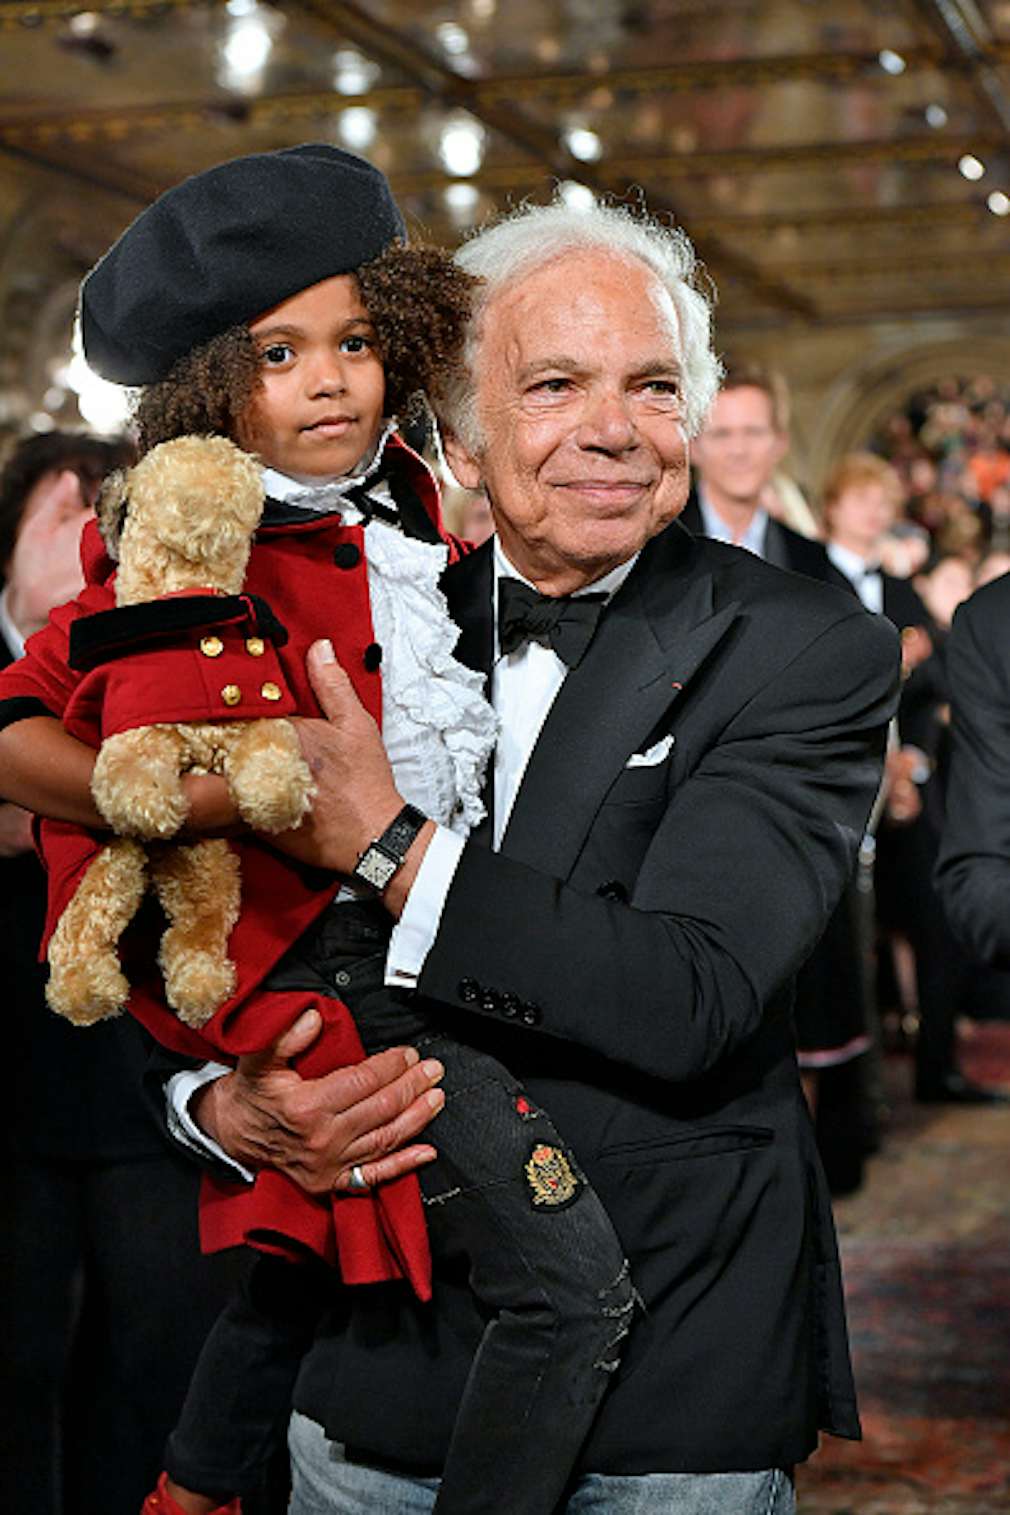 Ralph Lauren Will Be Honored With a Members Salute at the CFDA Awards